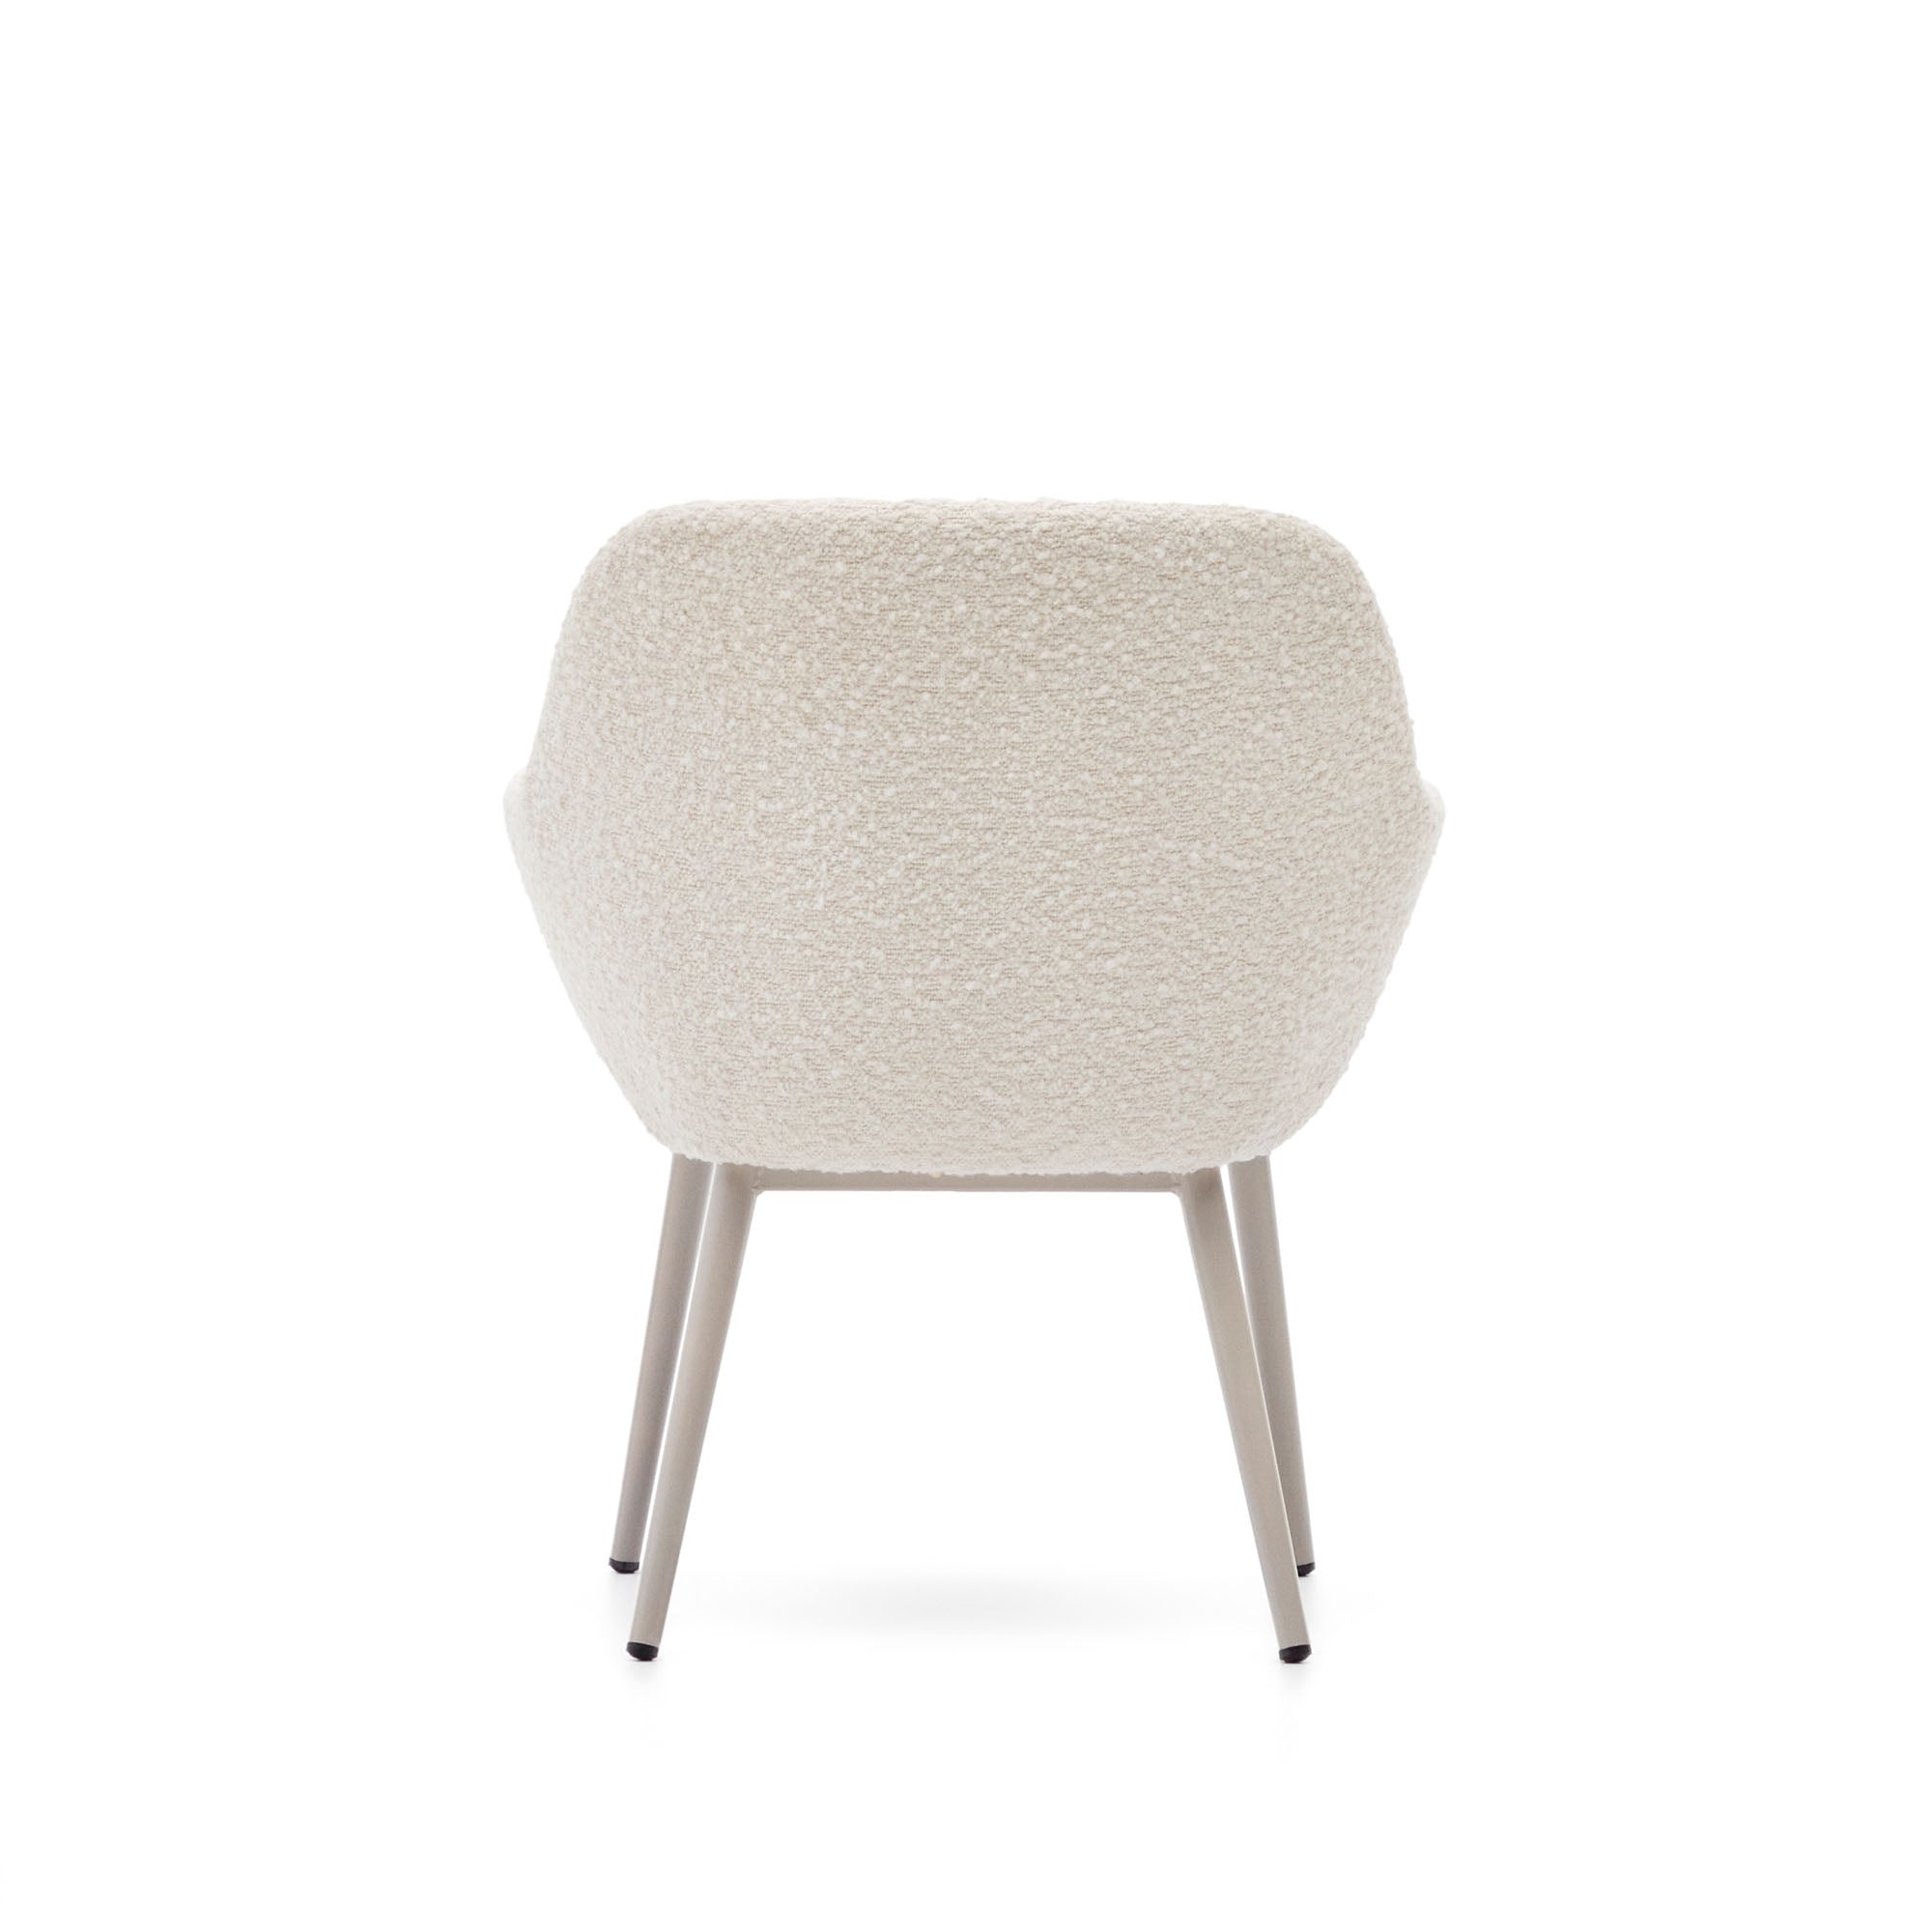 Konna children's chair in white shearling with steel legs and a beige finish